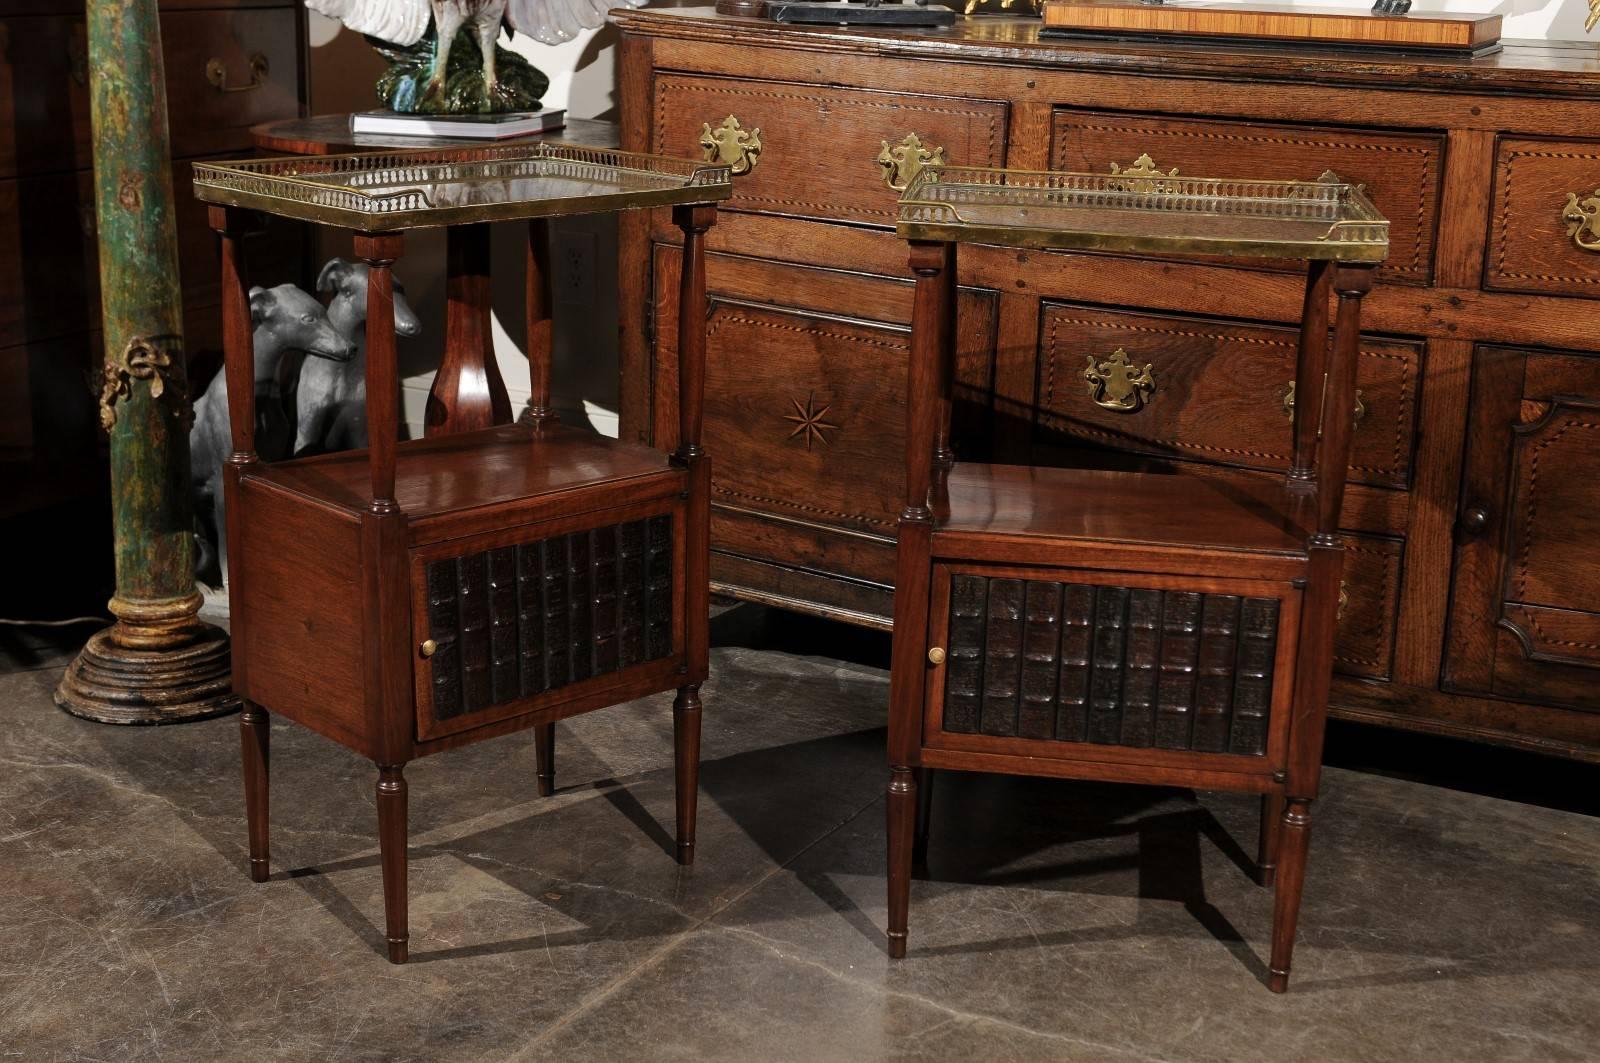 This pair of English turn of the century (19th-20th) nightstand side tables is made of old antiqued mirrored tops surrounded by a three-quarter brass gallery. These tops are supported by delicate Doric columns with a discreet entasis bulge, creating